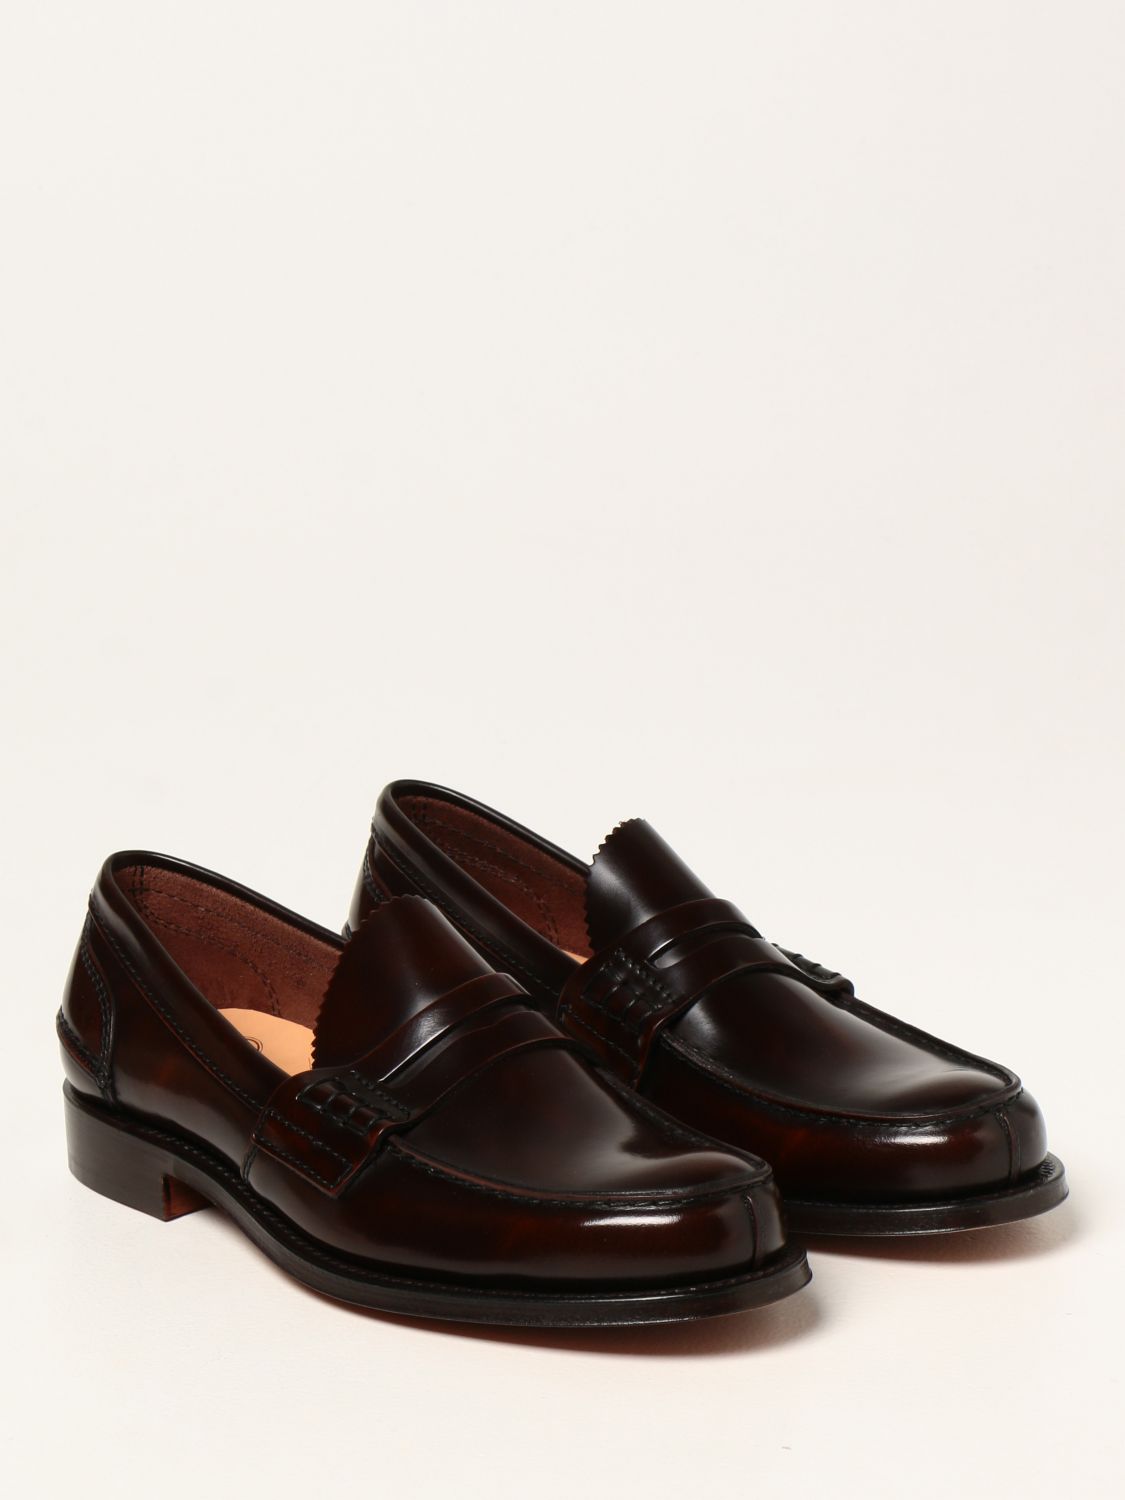 CHURCH'S: Tunbridge loafer in brushed leather | Loafers Church's 